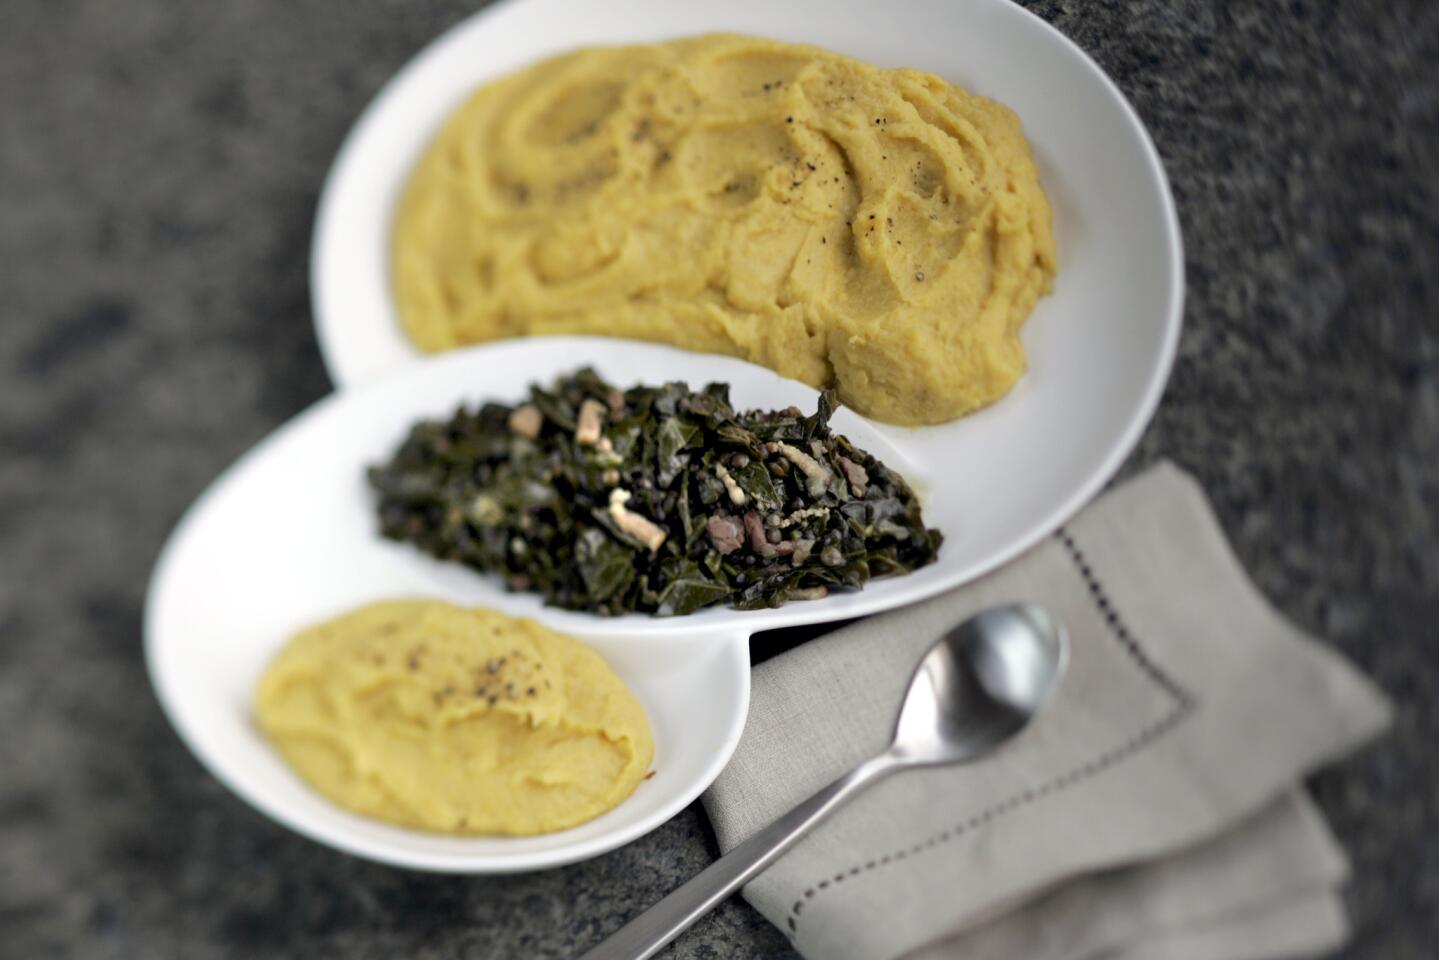 Spiced sweet potato puree and collard greens and green lentils